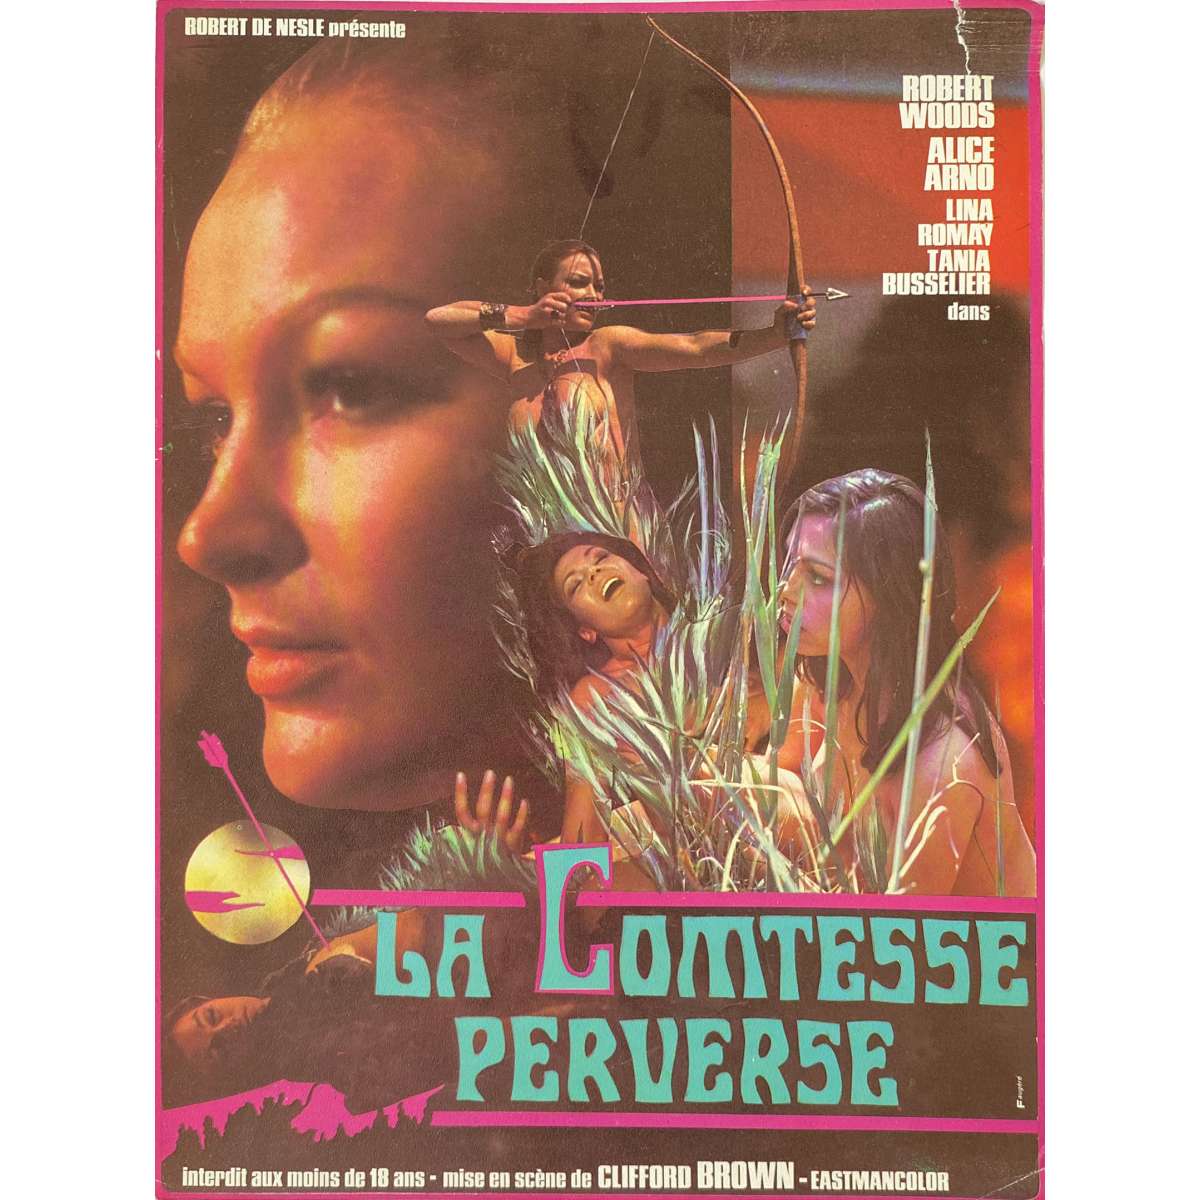 Countess Perverse French Herald 9x12 In 1974 2p